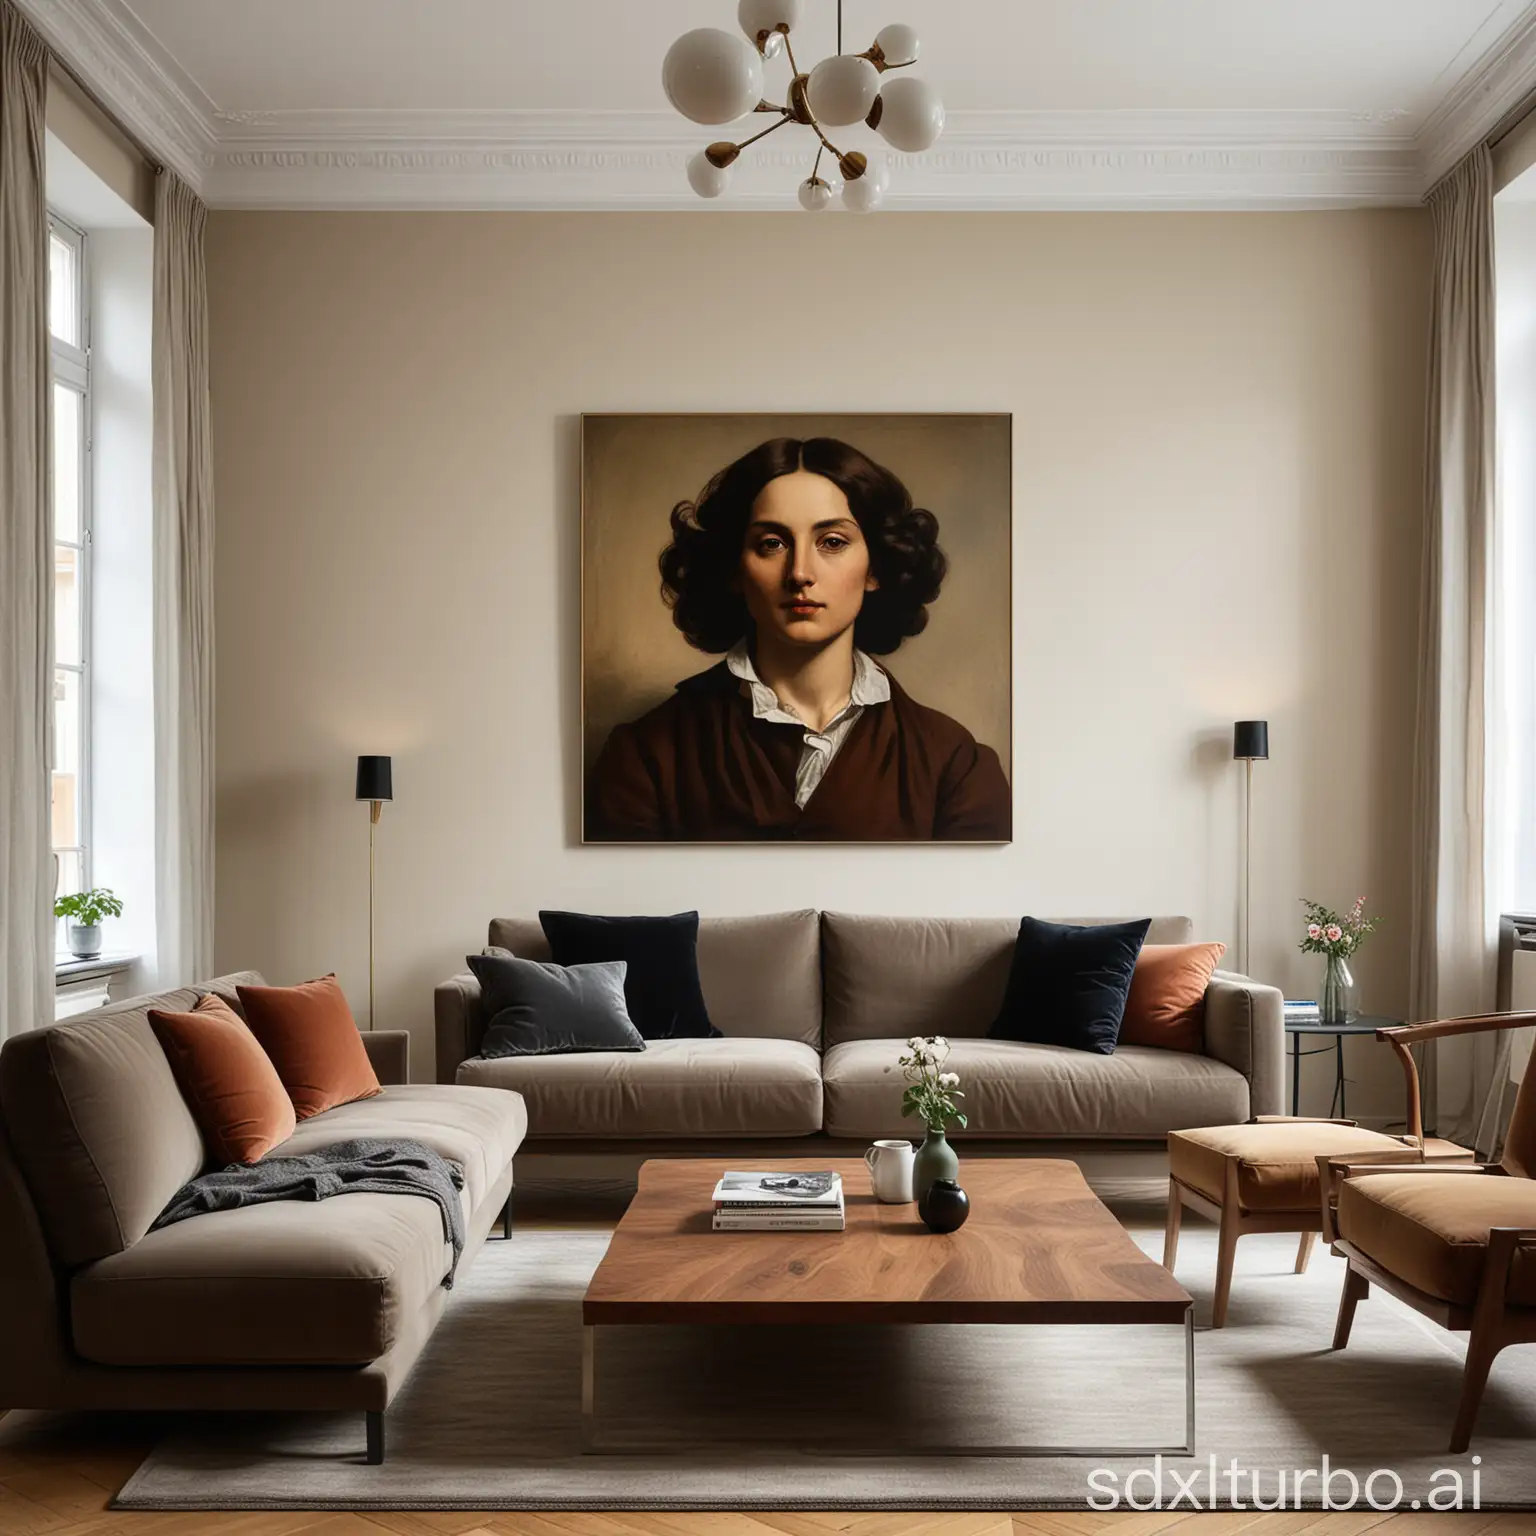 Modern-Berlin-Apartment-Living-Room-with-Gustave-Courbet-Art